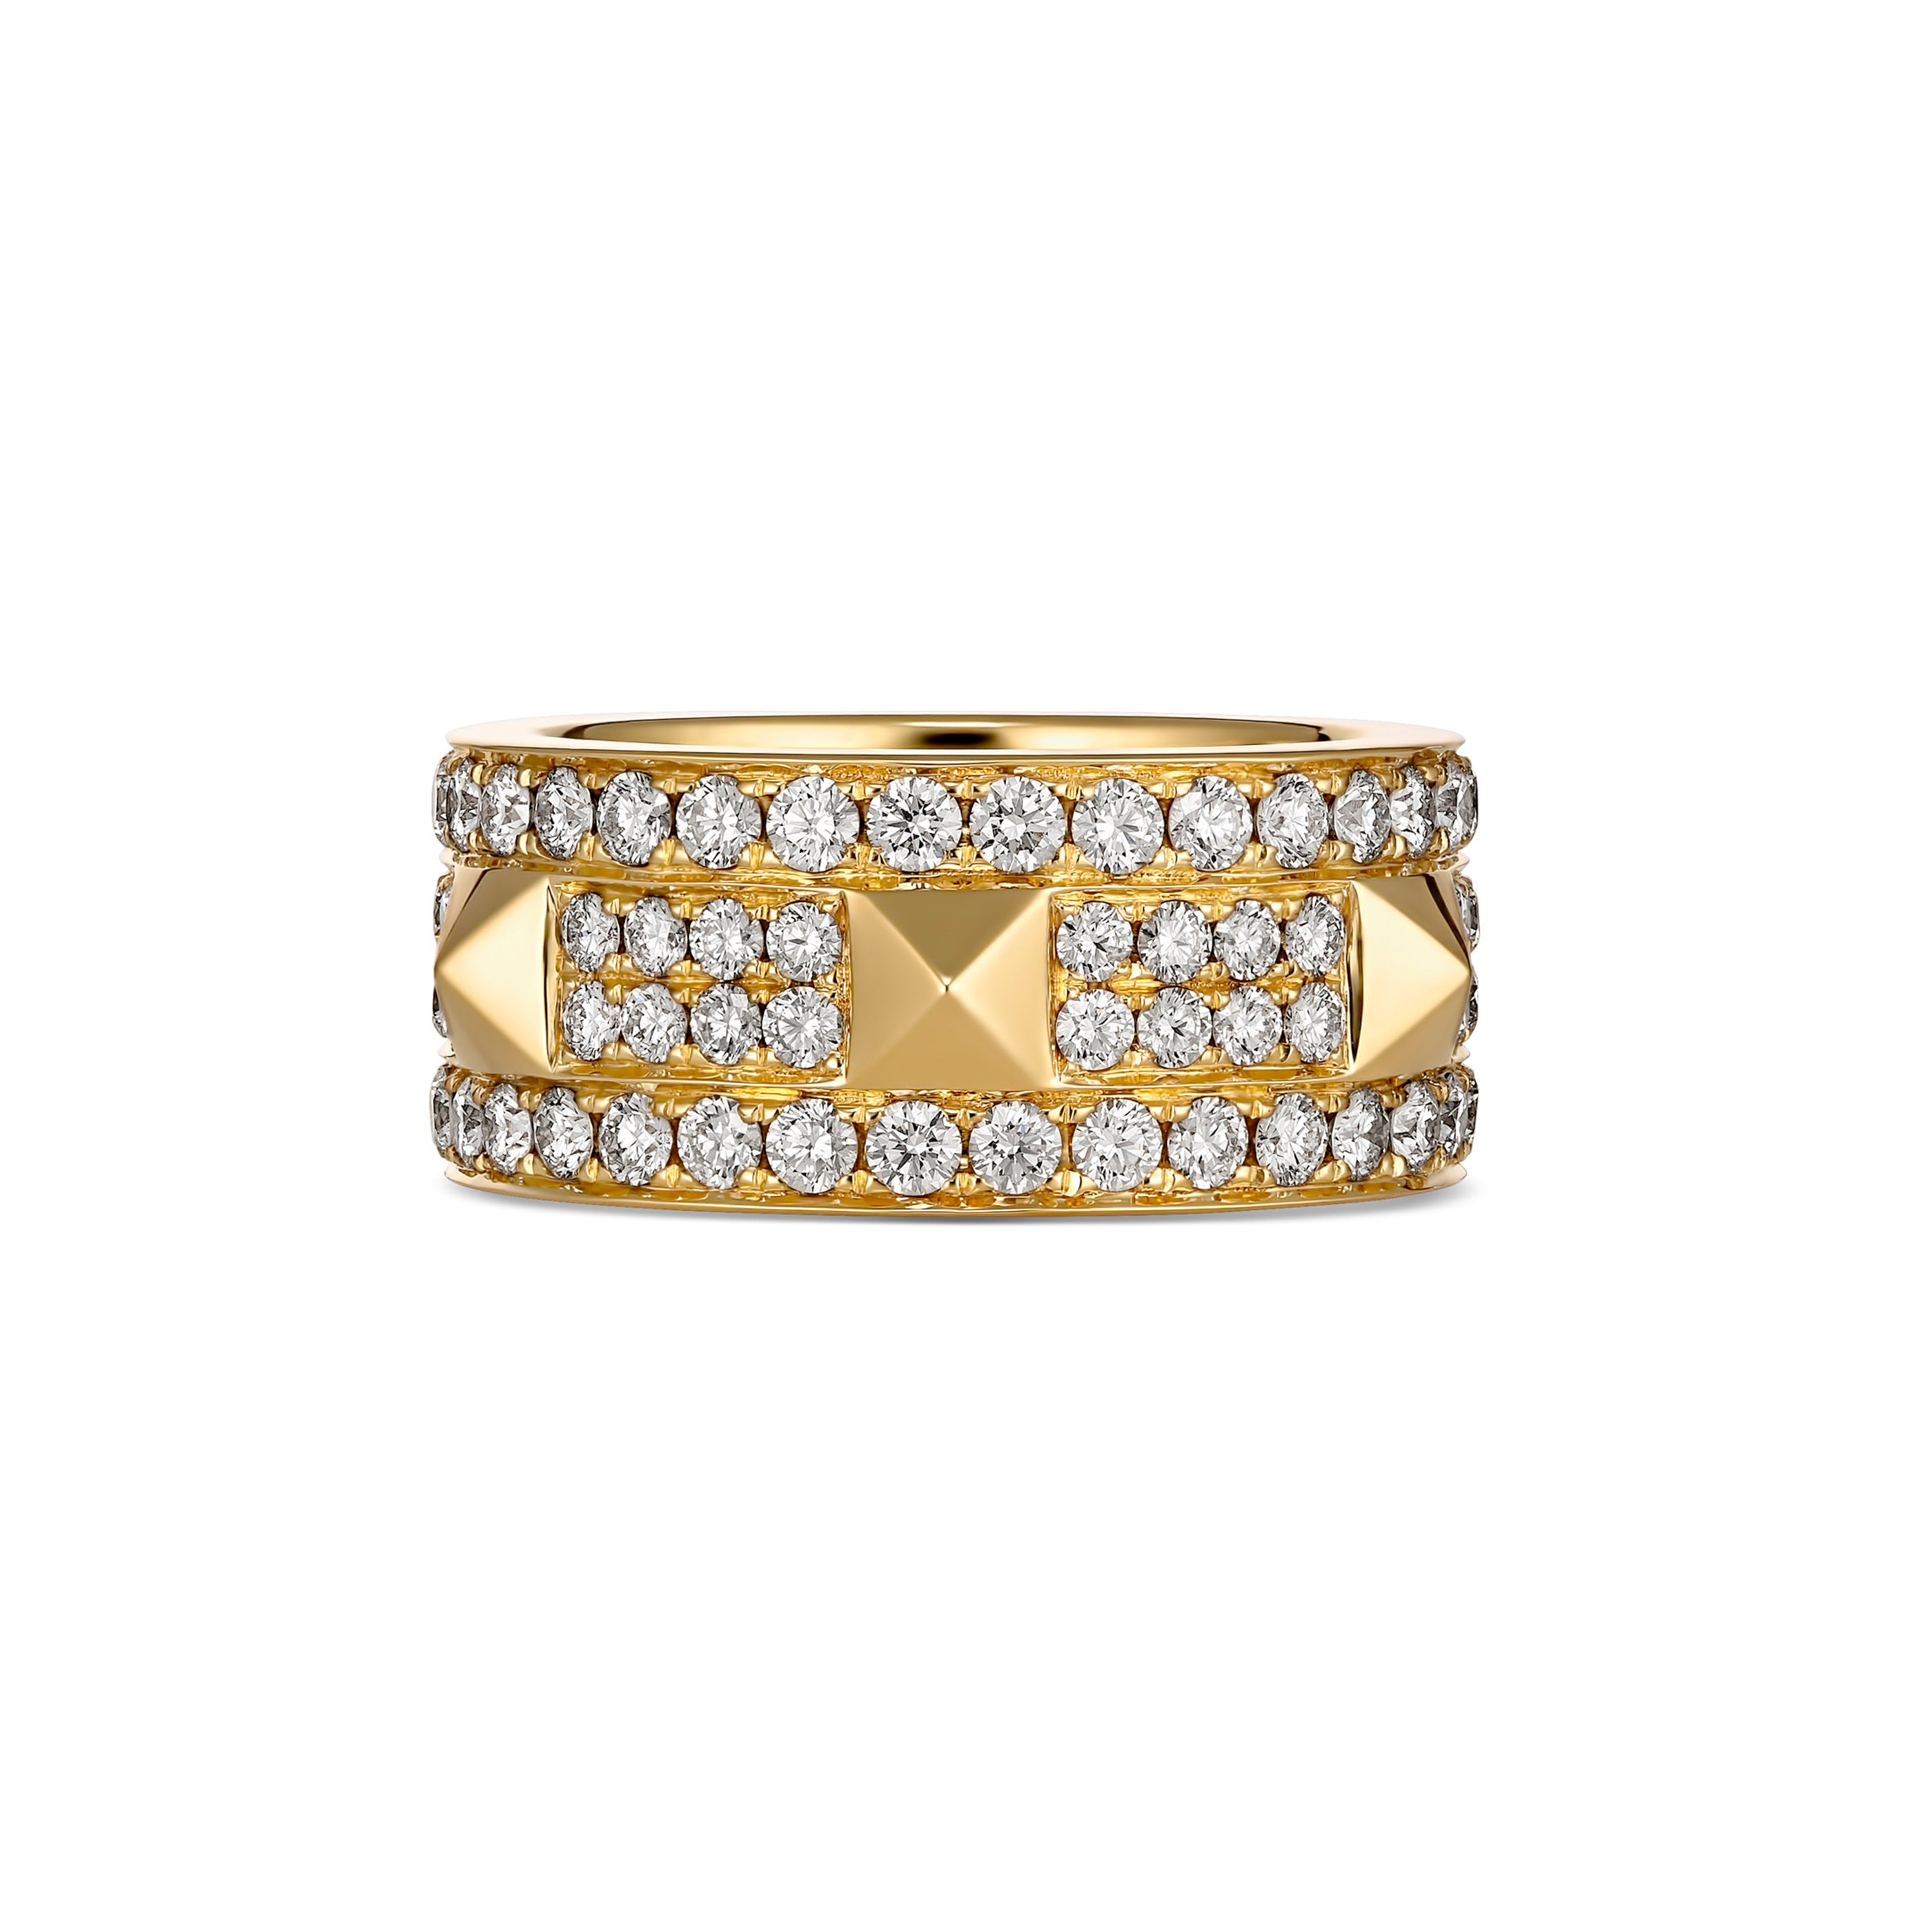 Louis Vuitton LV Volt One Band Ring